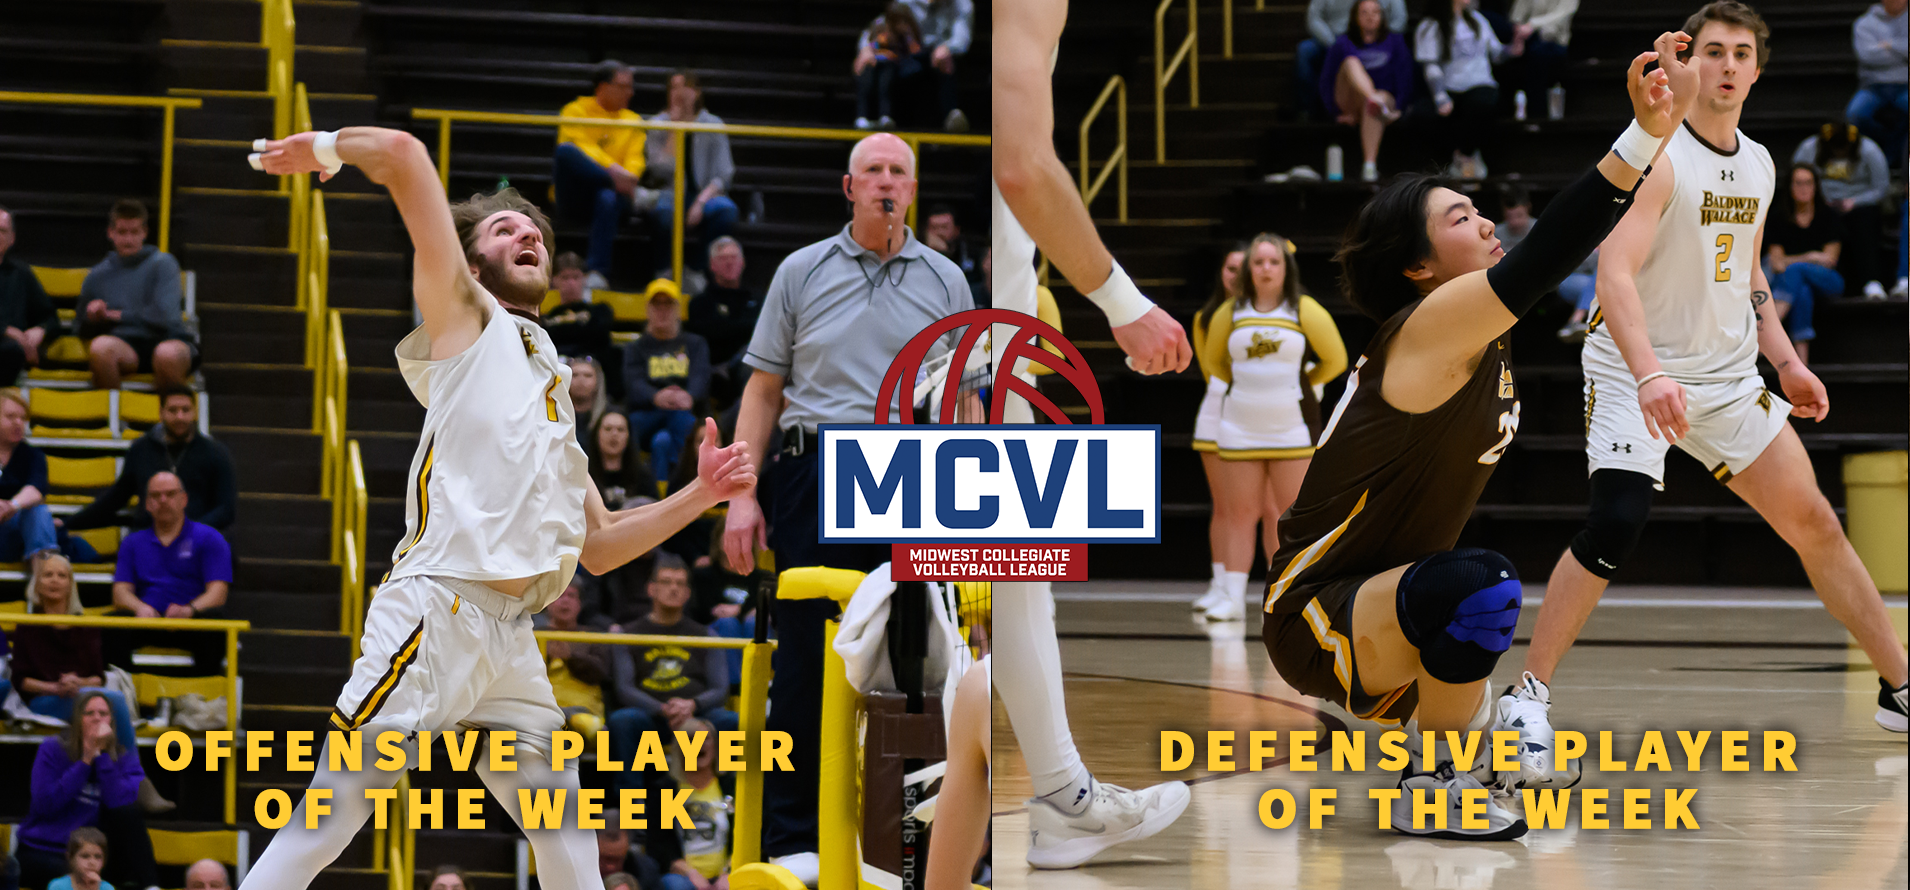 Michael Beard (pictured left) and Aiden Kim (pictured right) Named MCVL Offensive and Defensive Players of the Week (photos courtesy of Kevin Wilker '26)